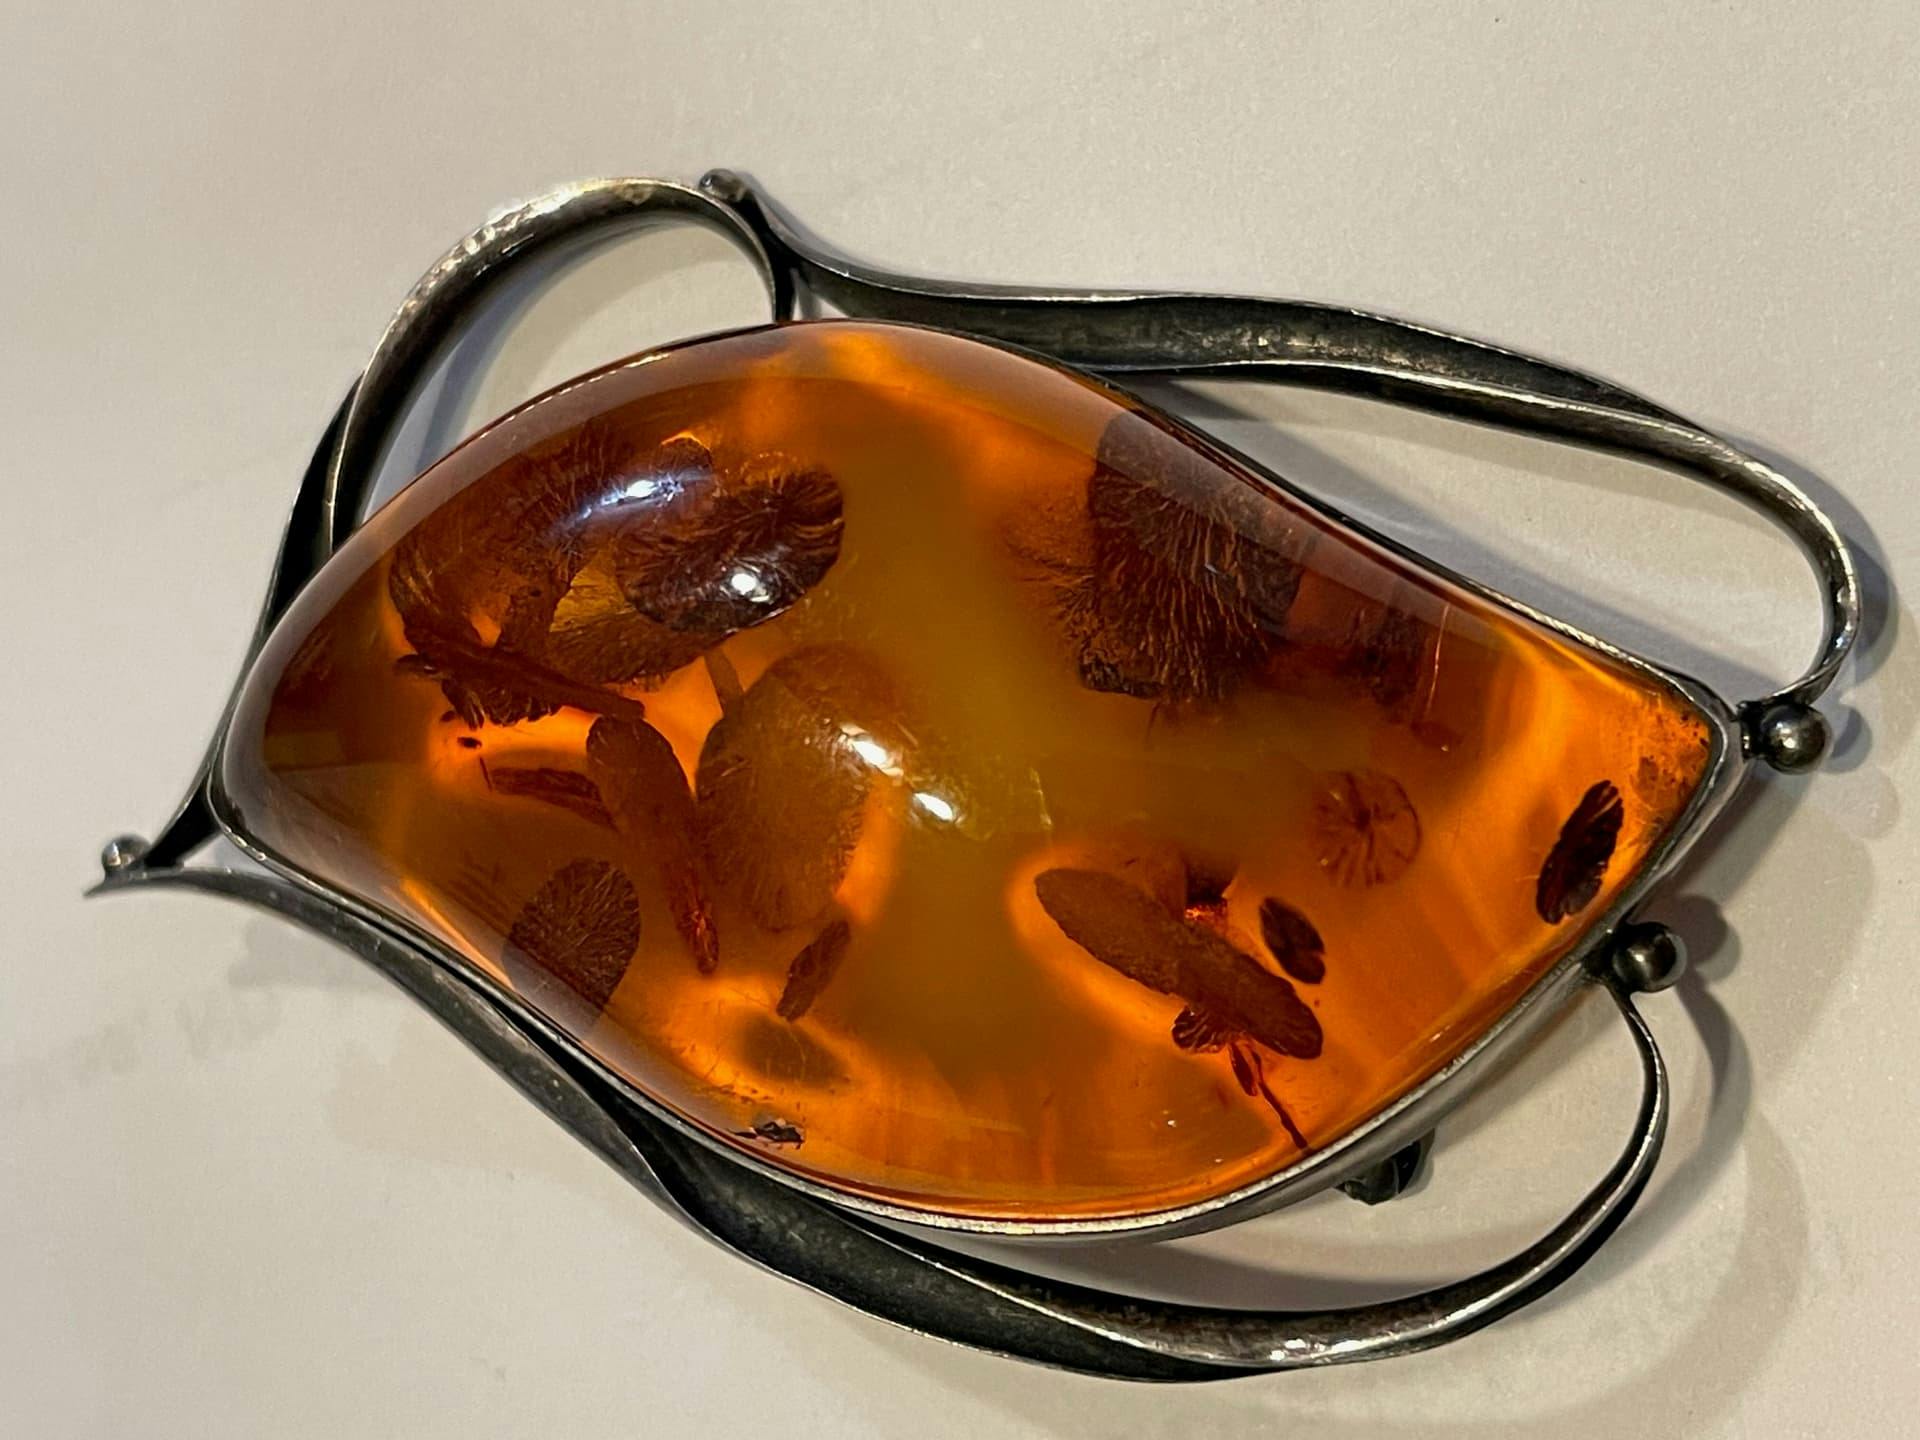 Is This Natural Amber?